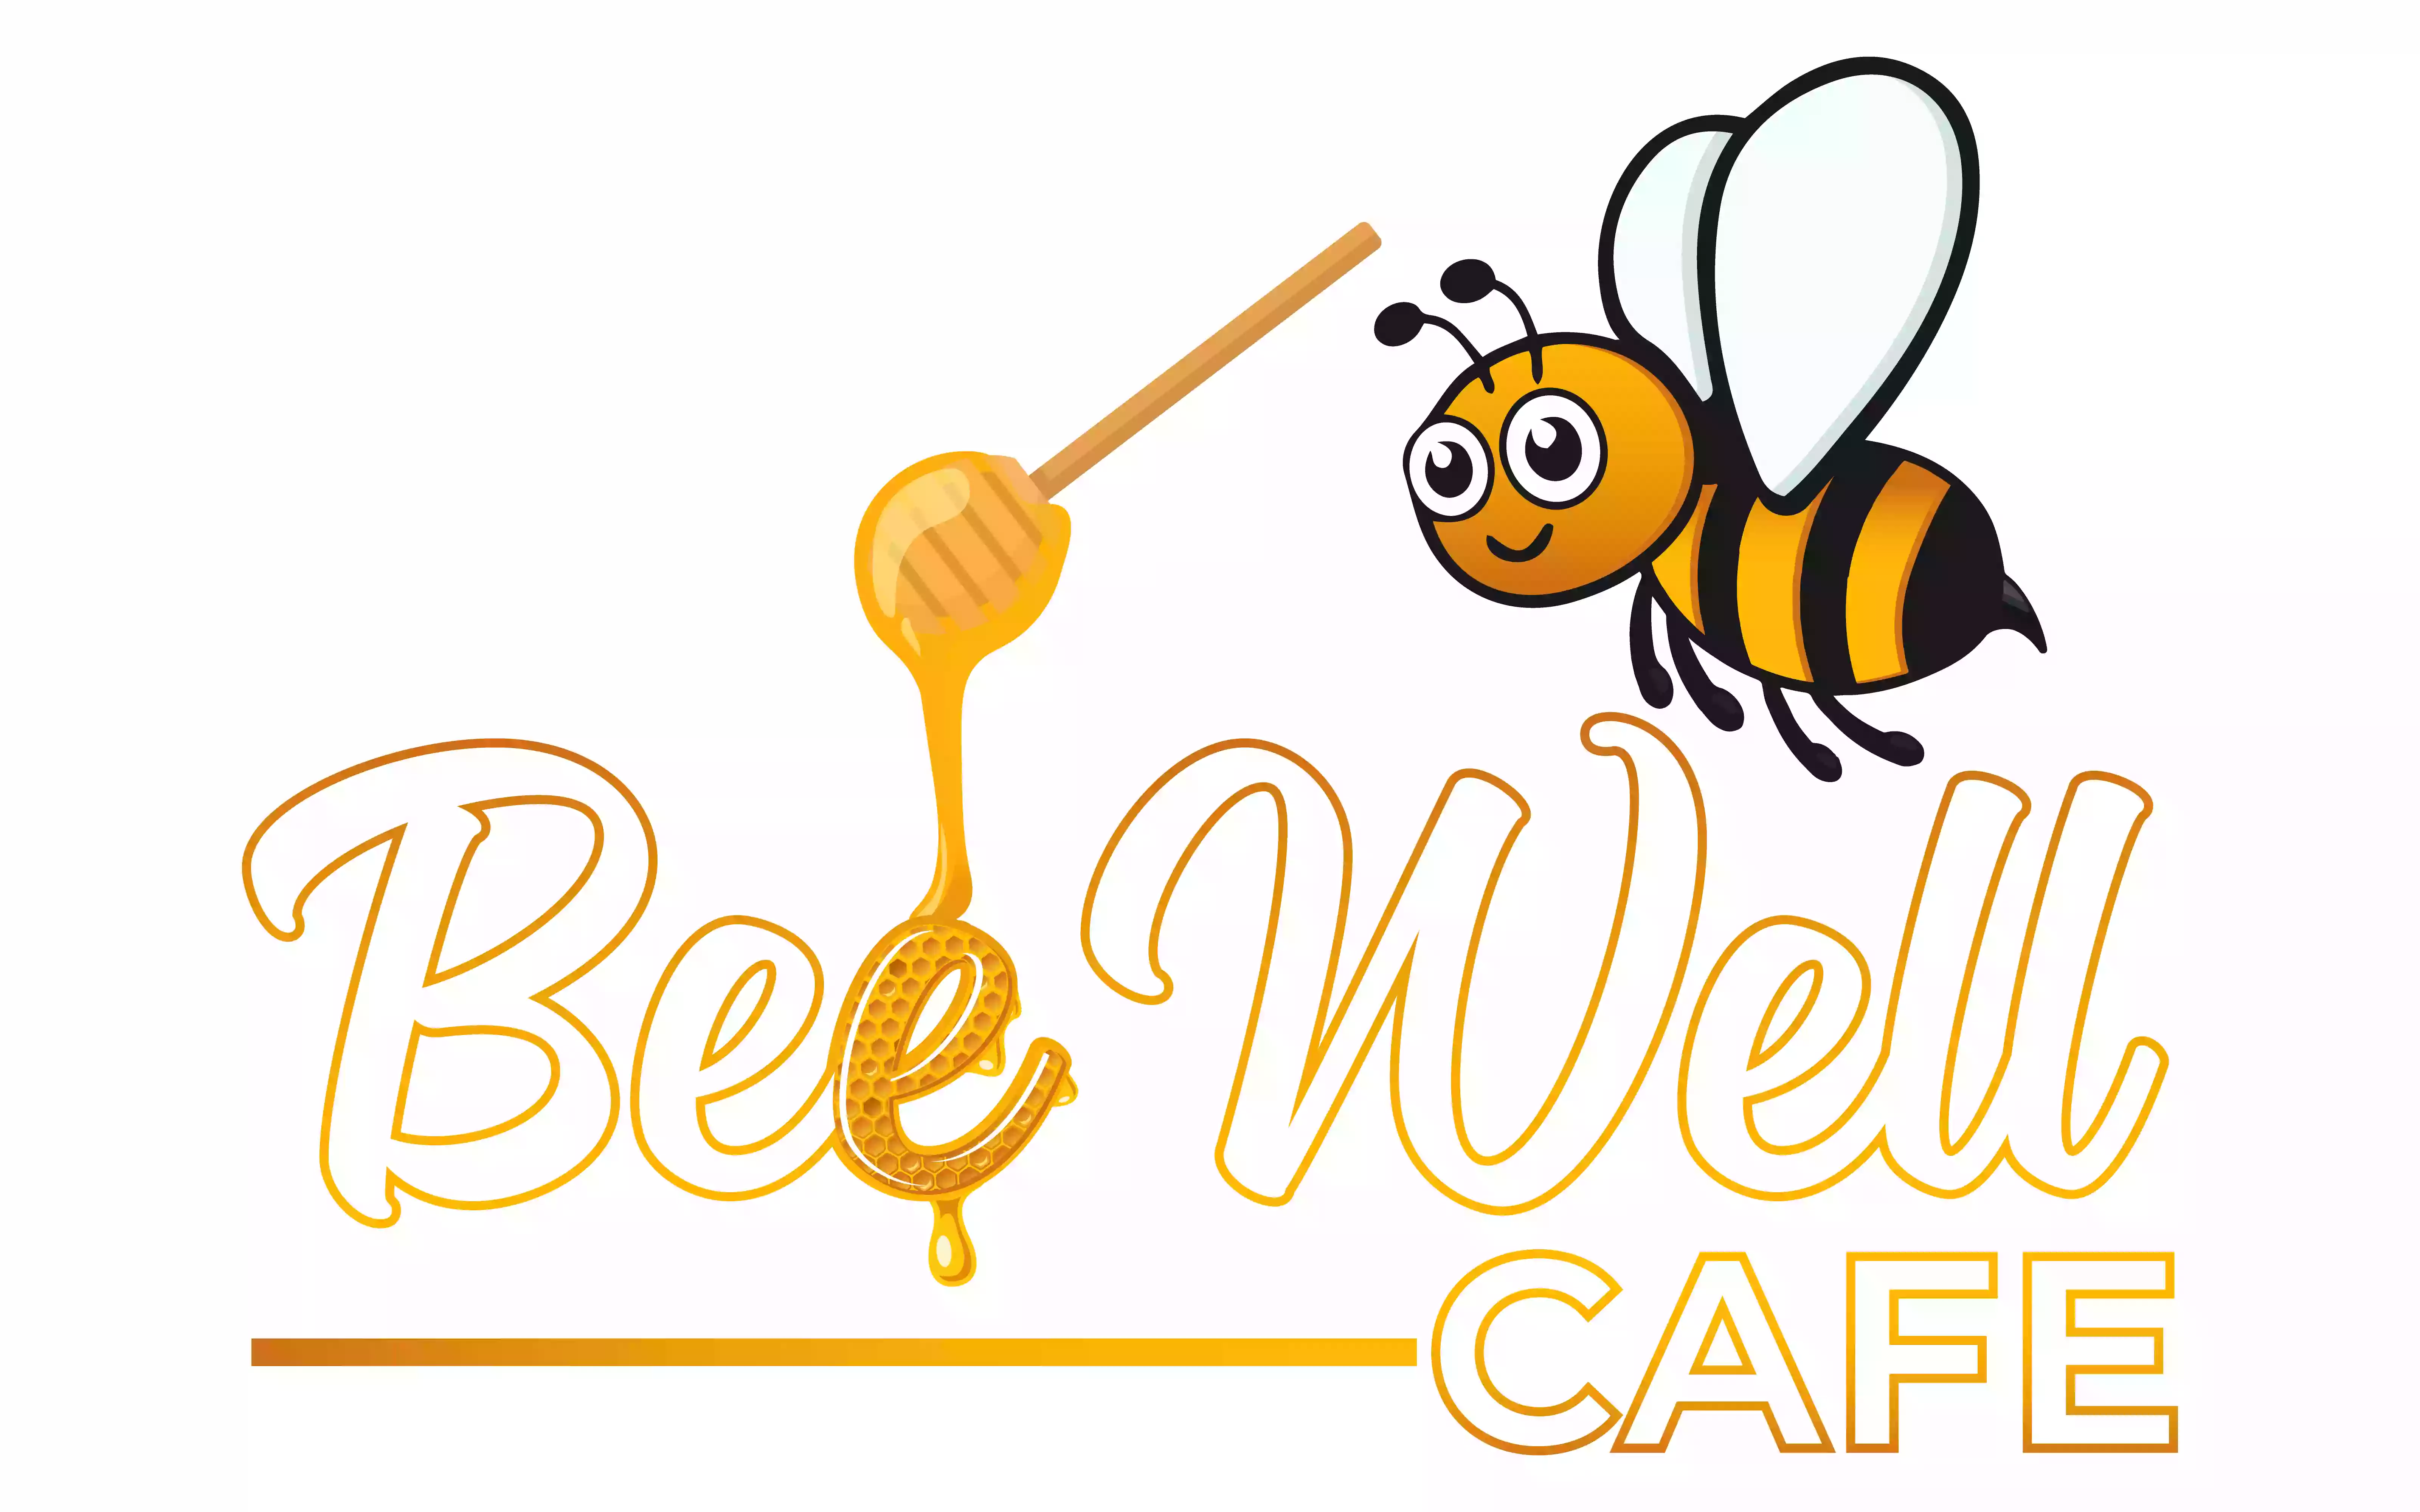 Bee Well Cafe